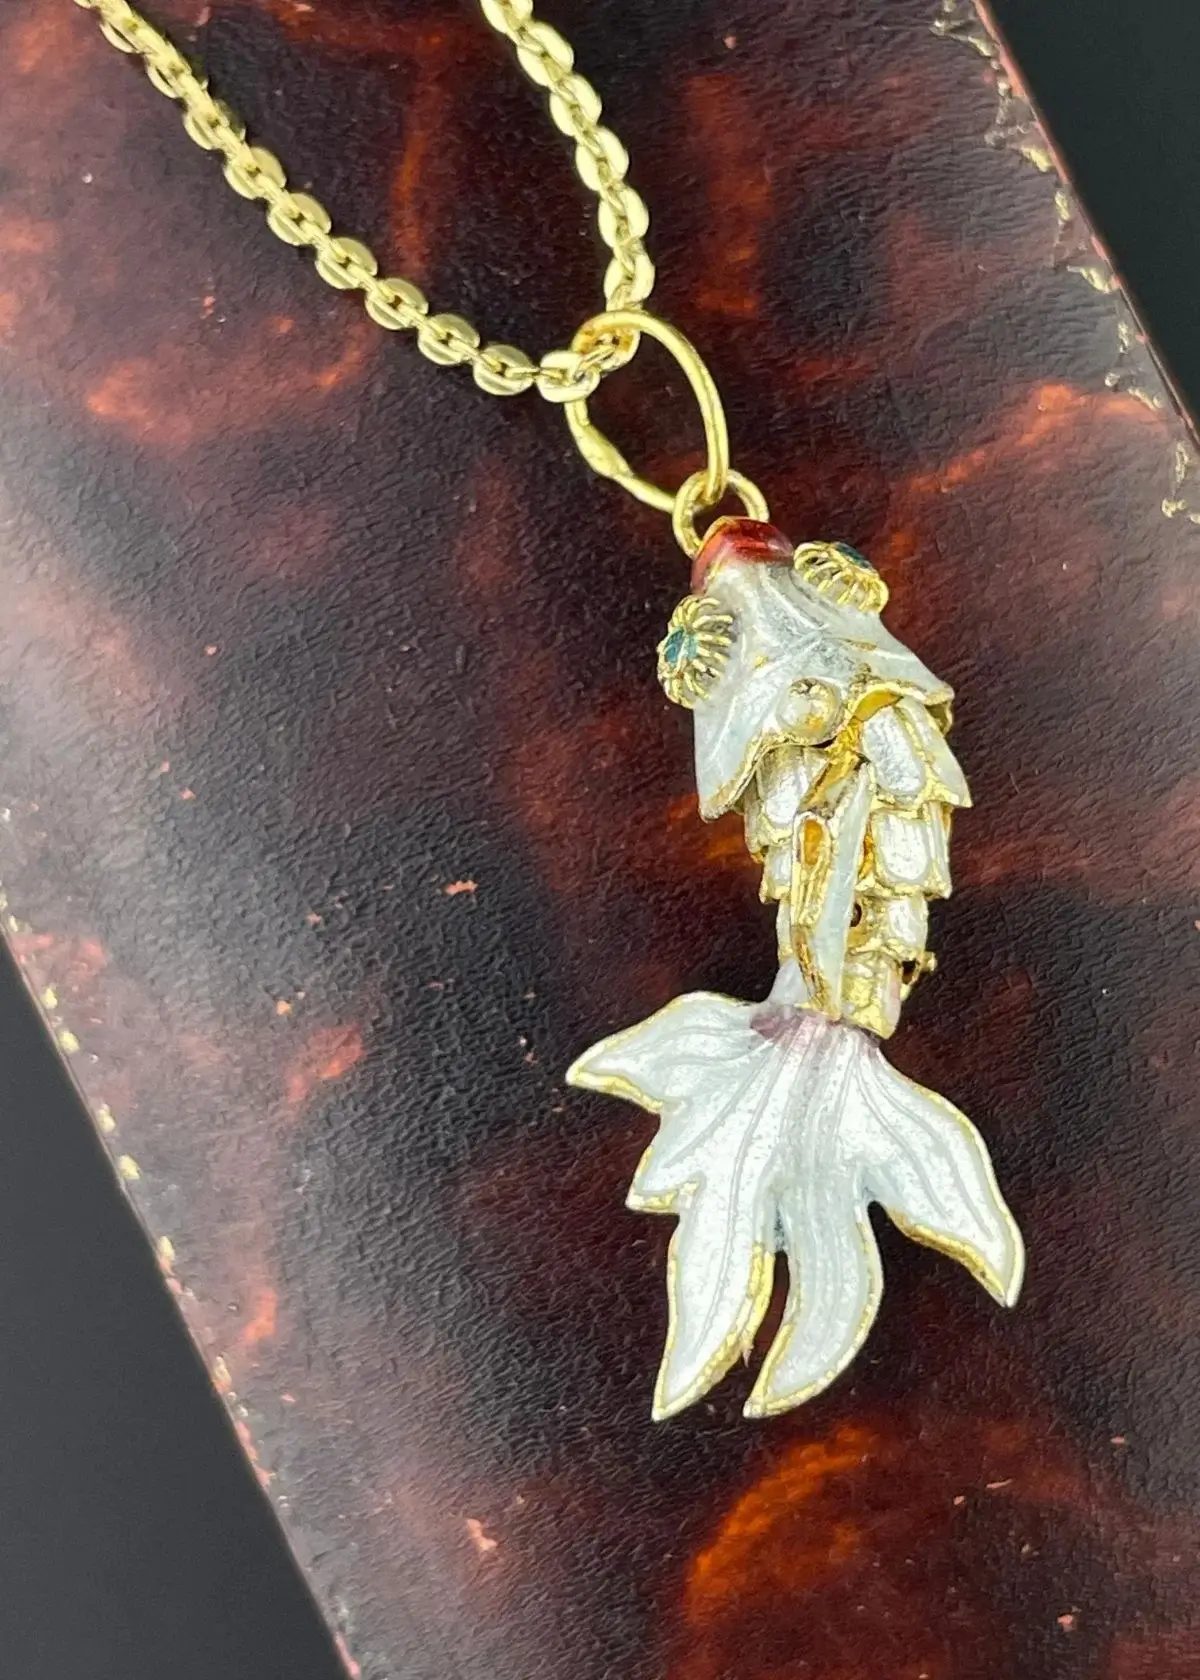 What is a fish necklace?